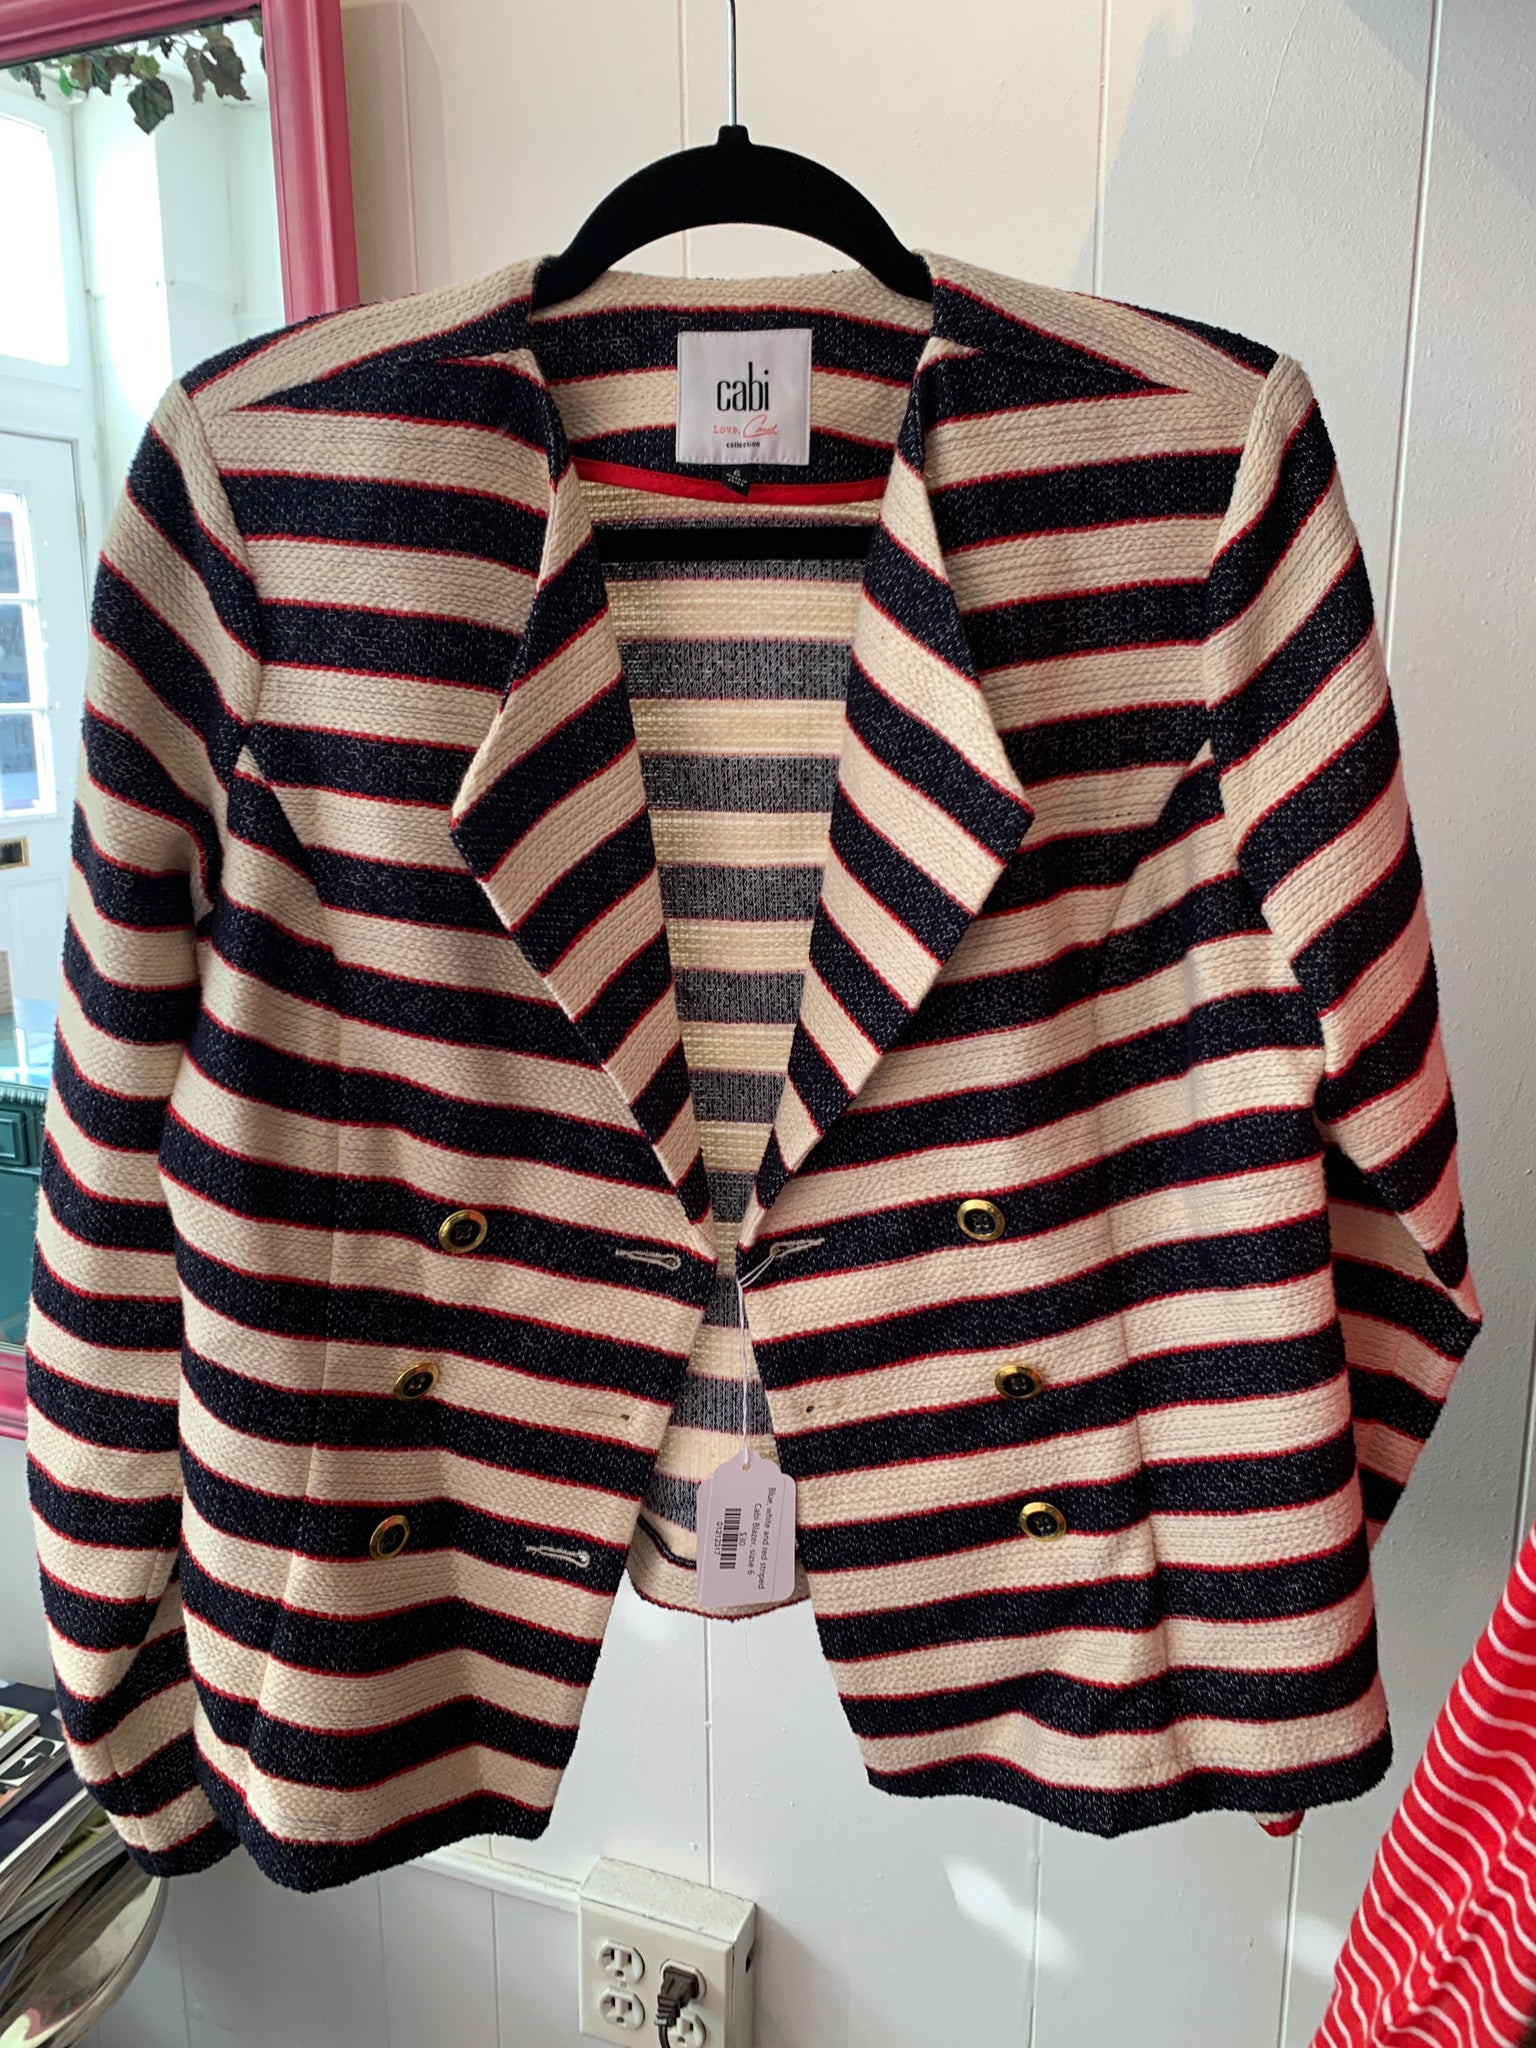 Blue, white and red striped Cabi Blazer, sizse 6